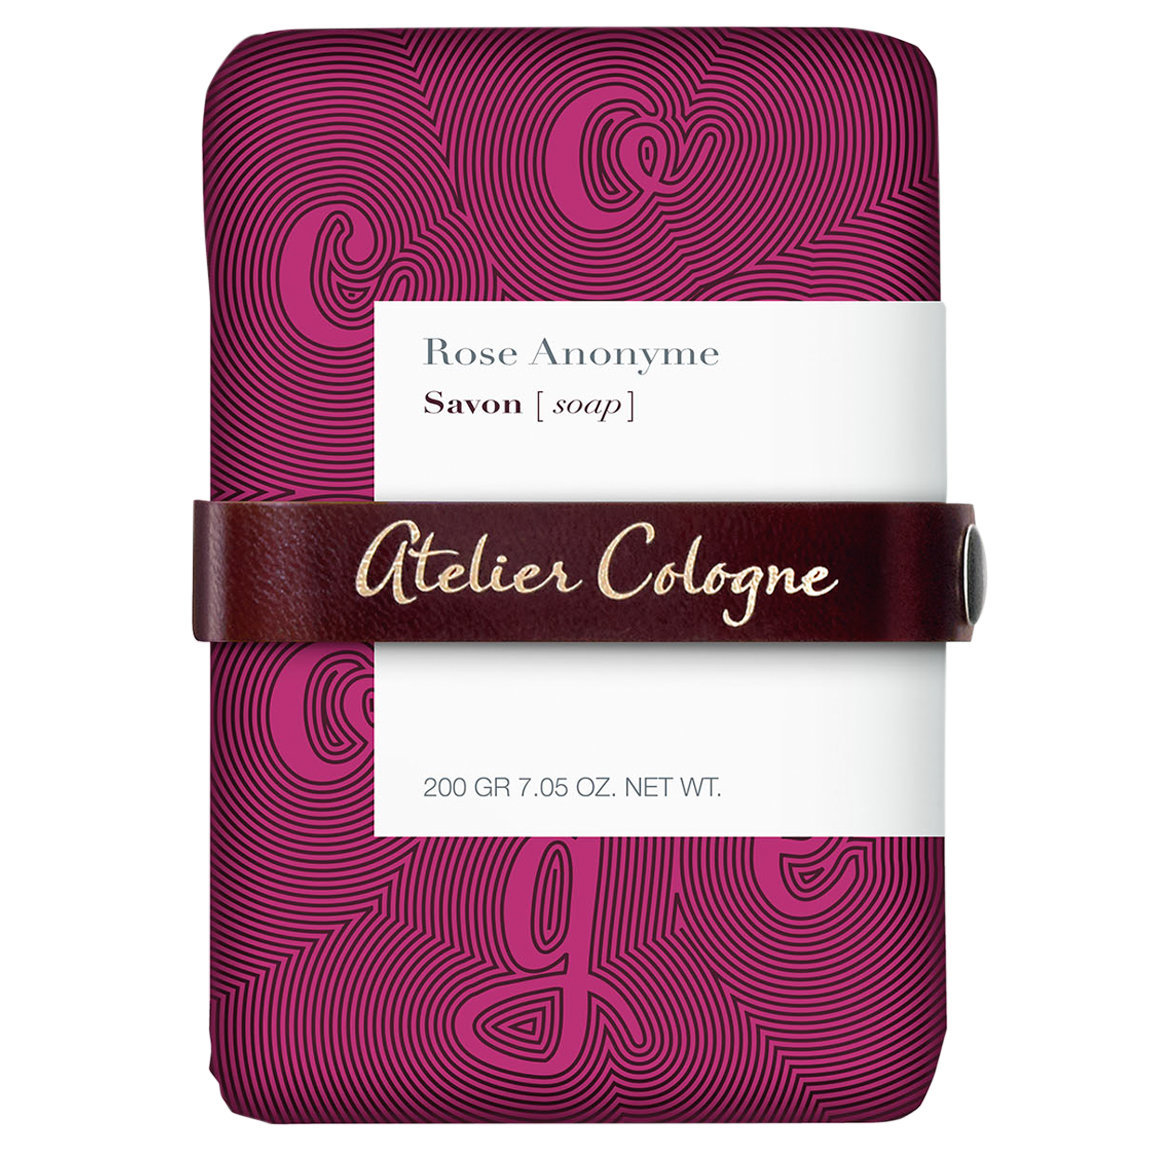 Atelier Cologne Rose Anonyme Soap alternative view 1 - product swatch.